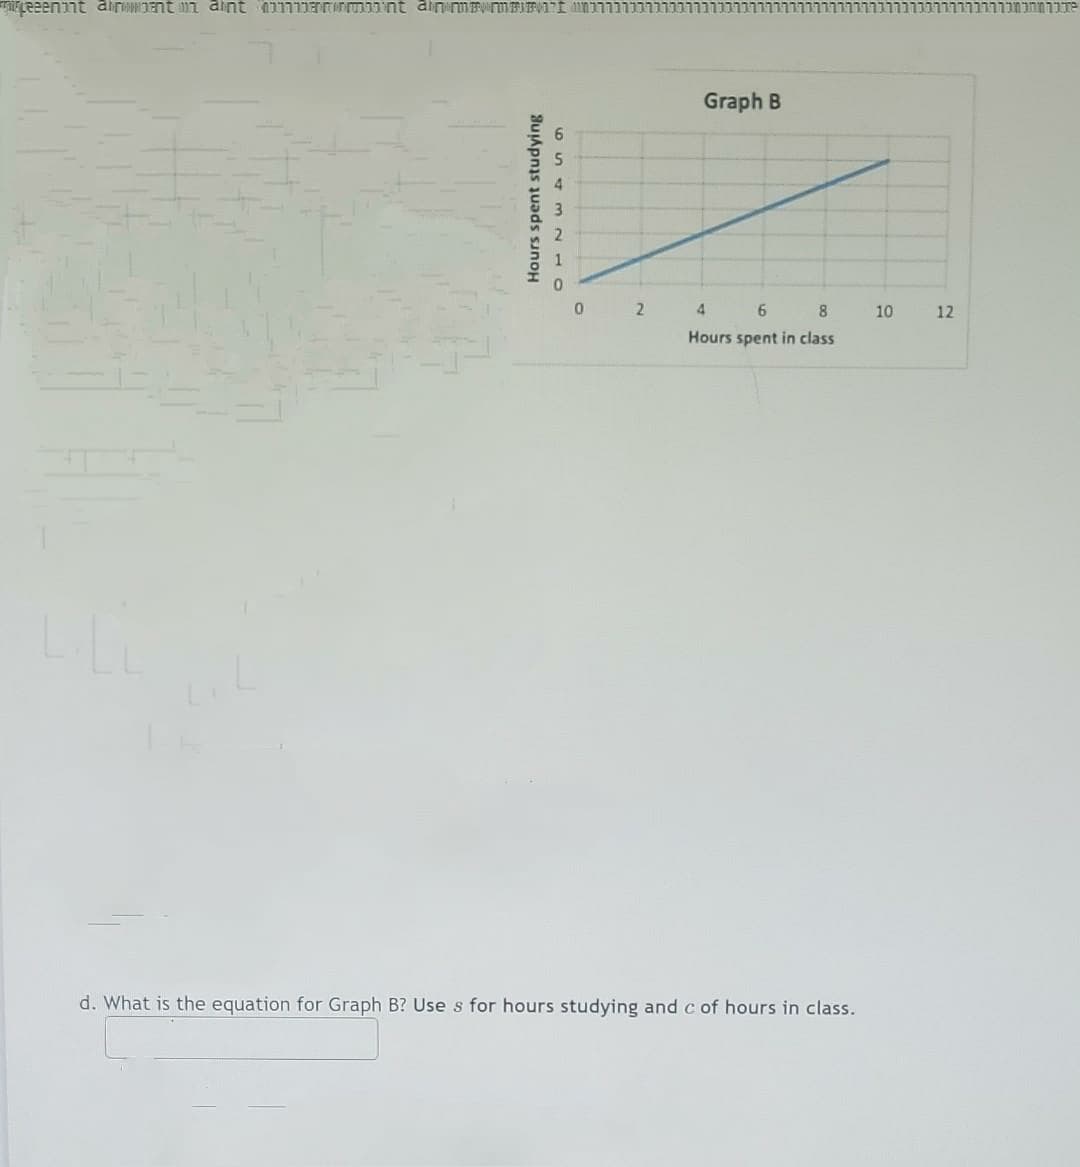 peeenint ant maintmant ainm an
Hours spent studying
0
2
Graph B
4
6
8
Hours spent in class
d. What is the equation for Graph B? Use s for hours studying and c of hours in class.
10
12
ueענטטעטענר